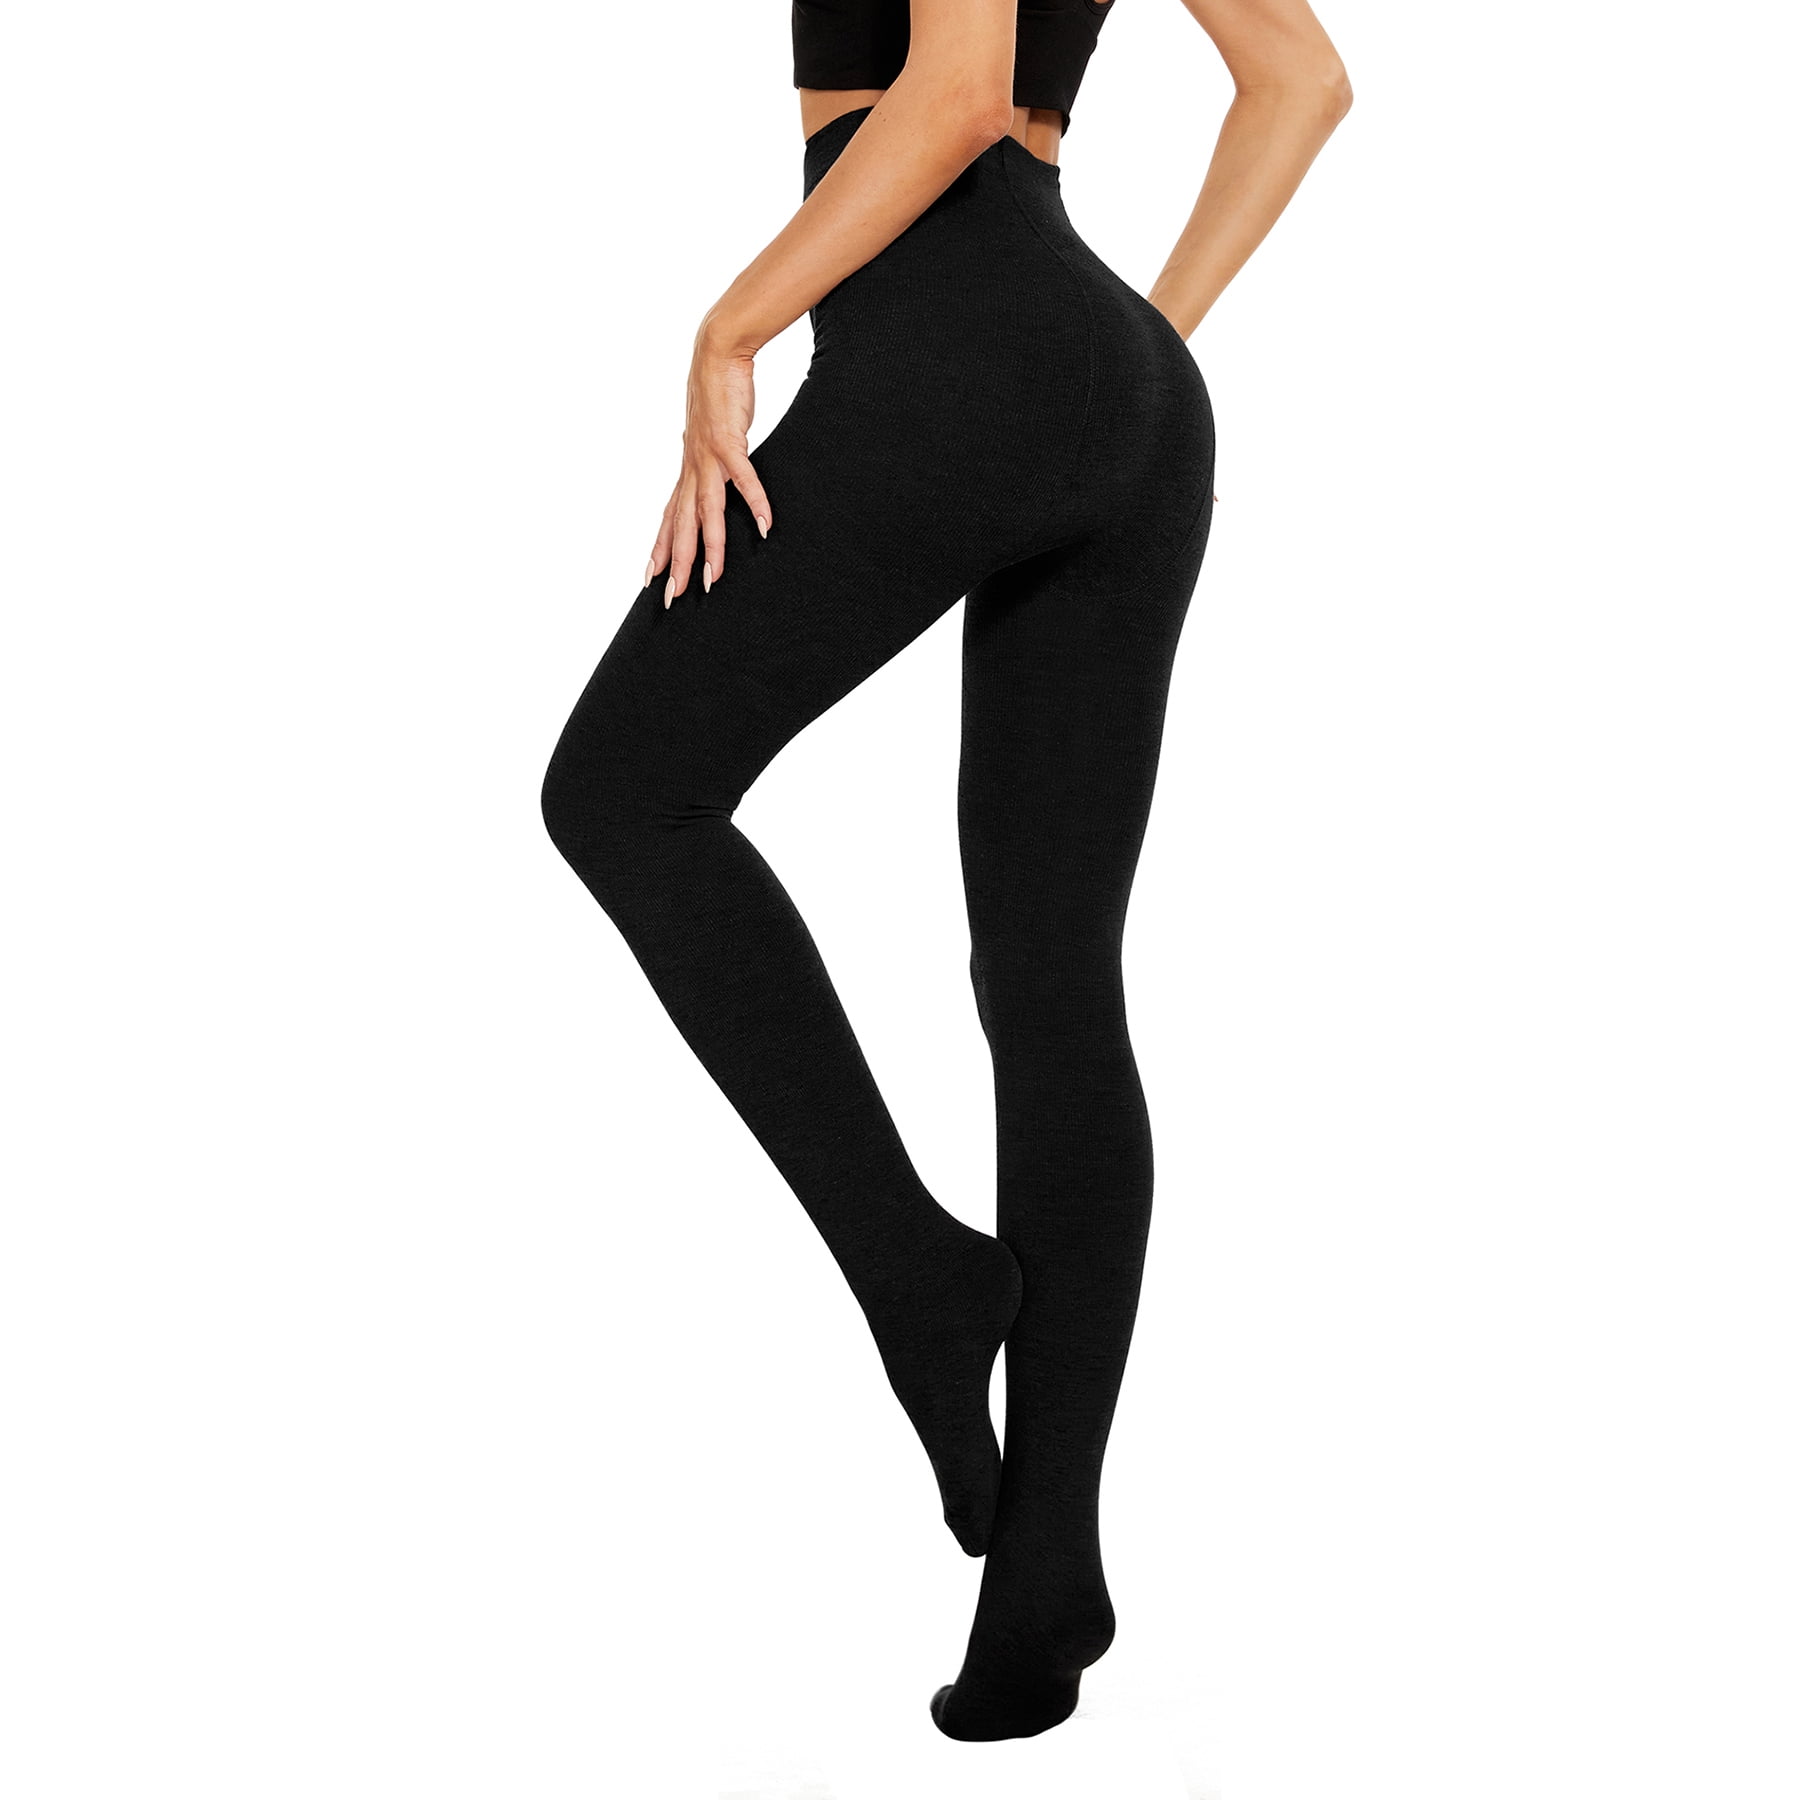 Buy ALAXENDER Opaque Tights for Women Fleece Lined Control Top